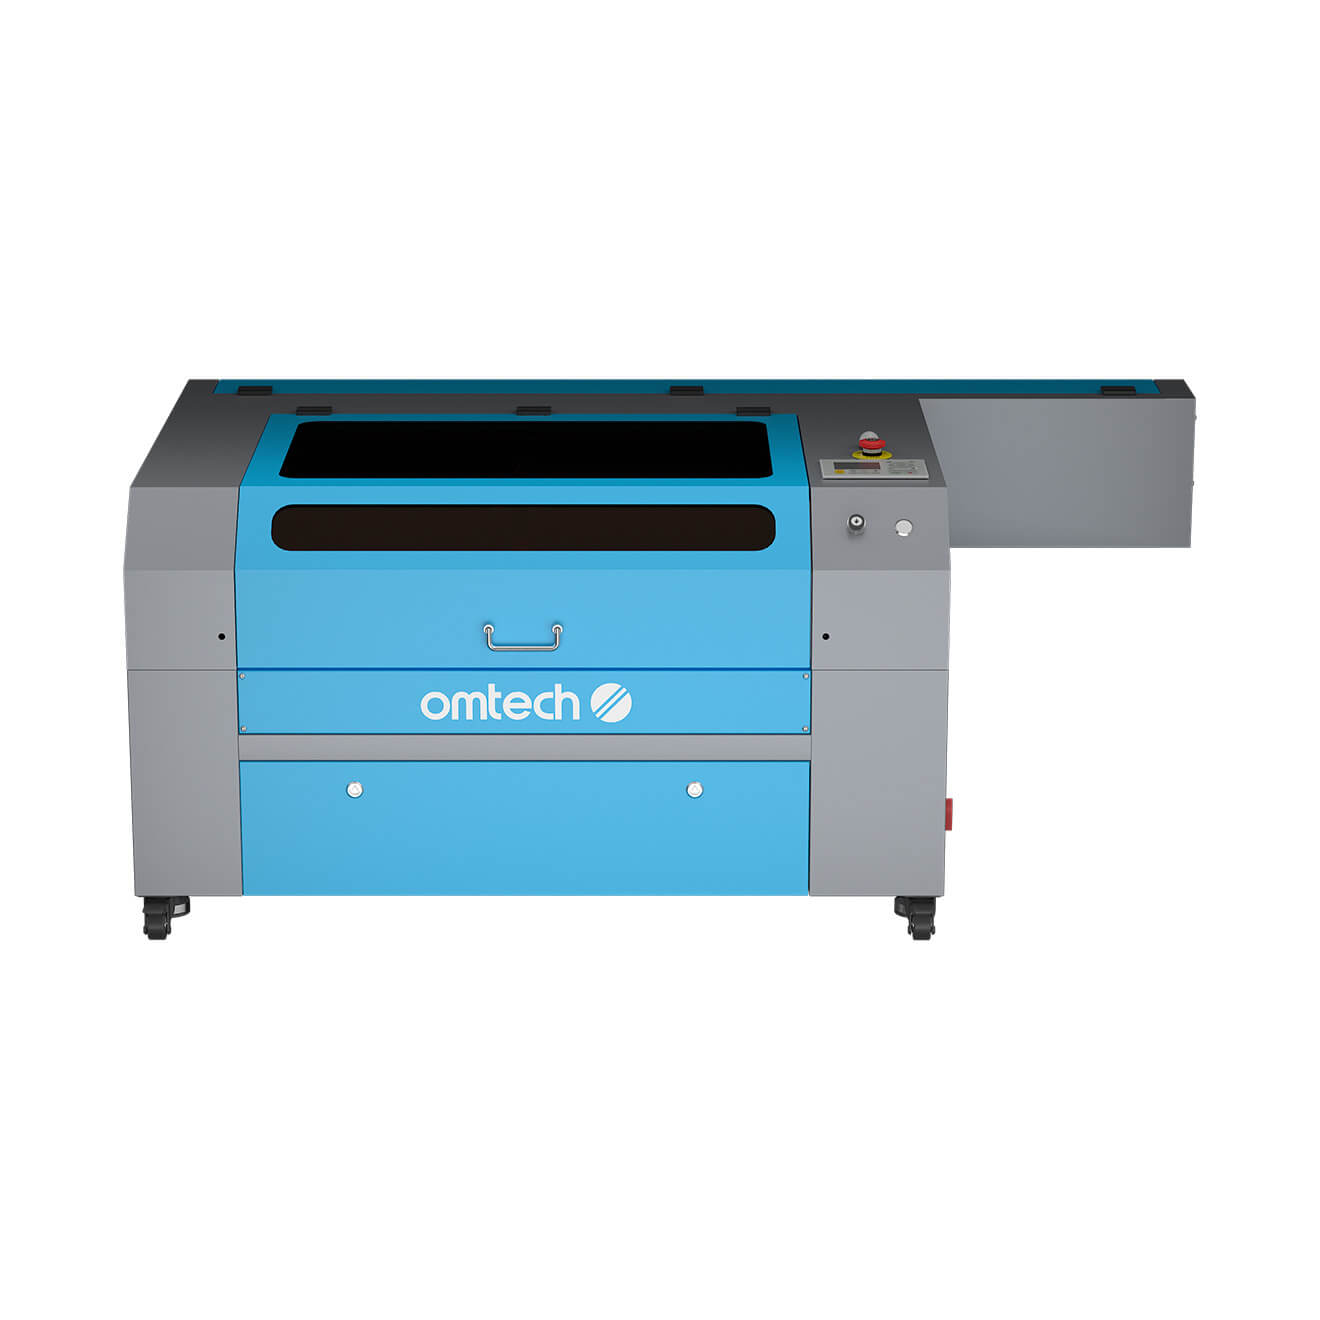 100W CO2 Laser Engraving Machine & Cutter with 700x500mm Engraving Area | Max-750